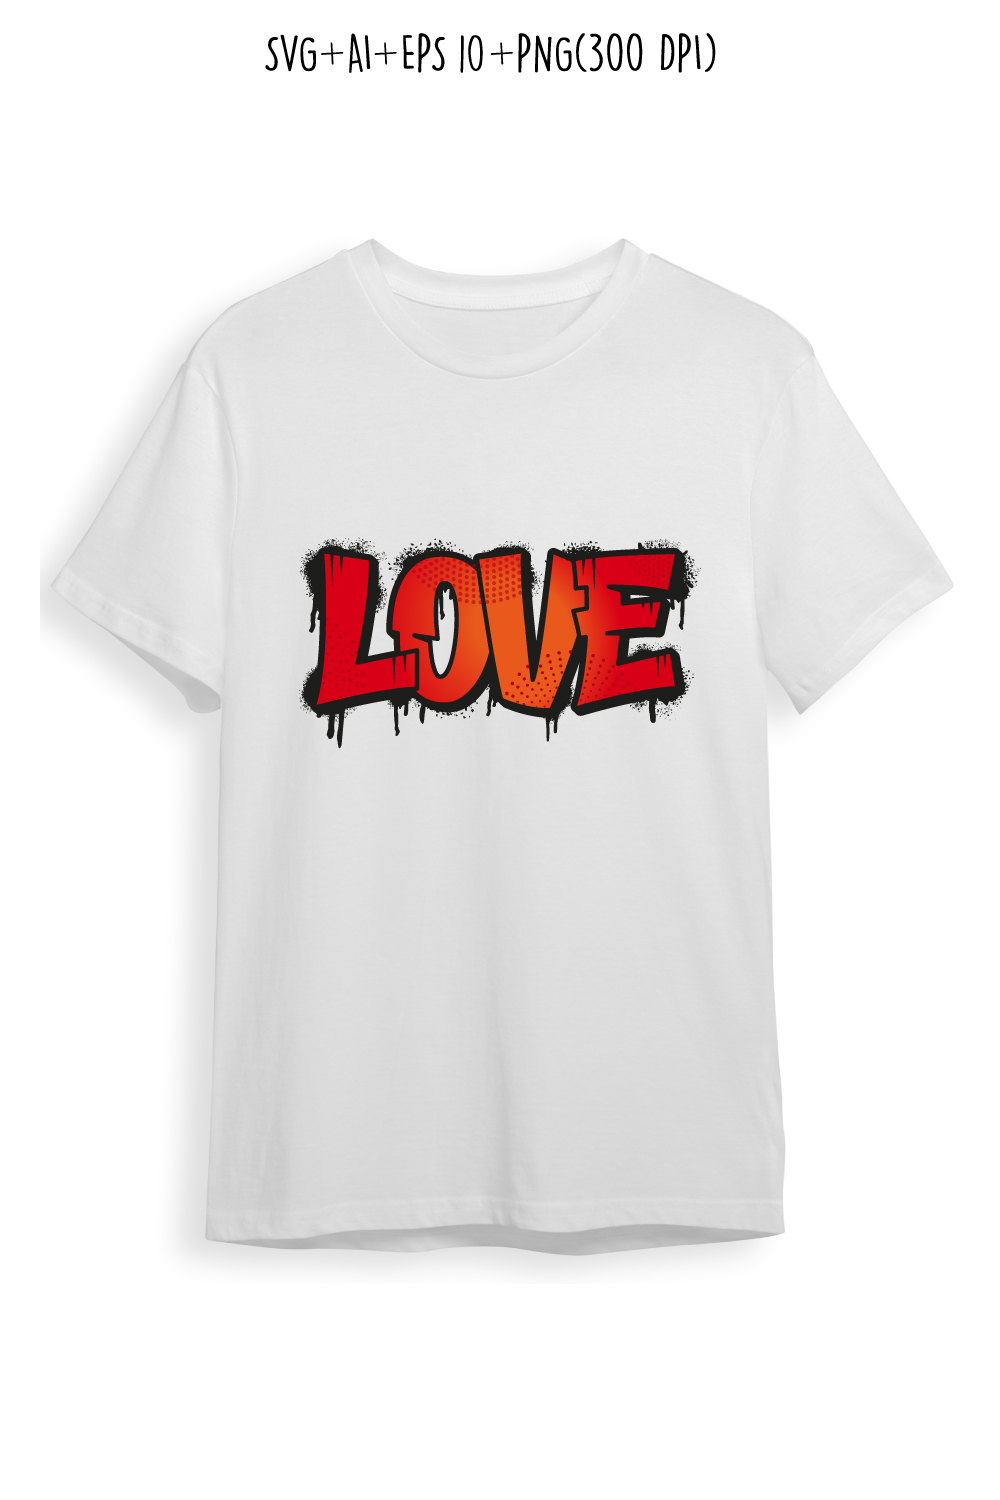 Love graffiti art for valentines day using of t-shirt, template, print pinterest preview image.